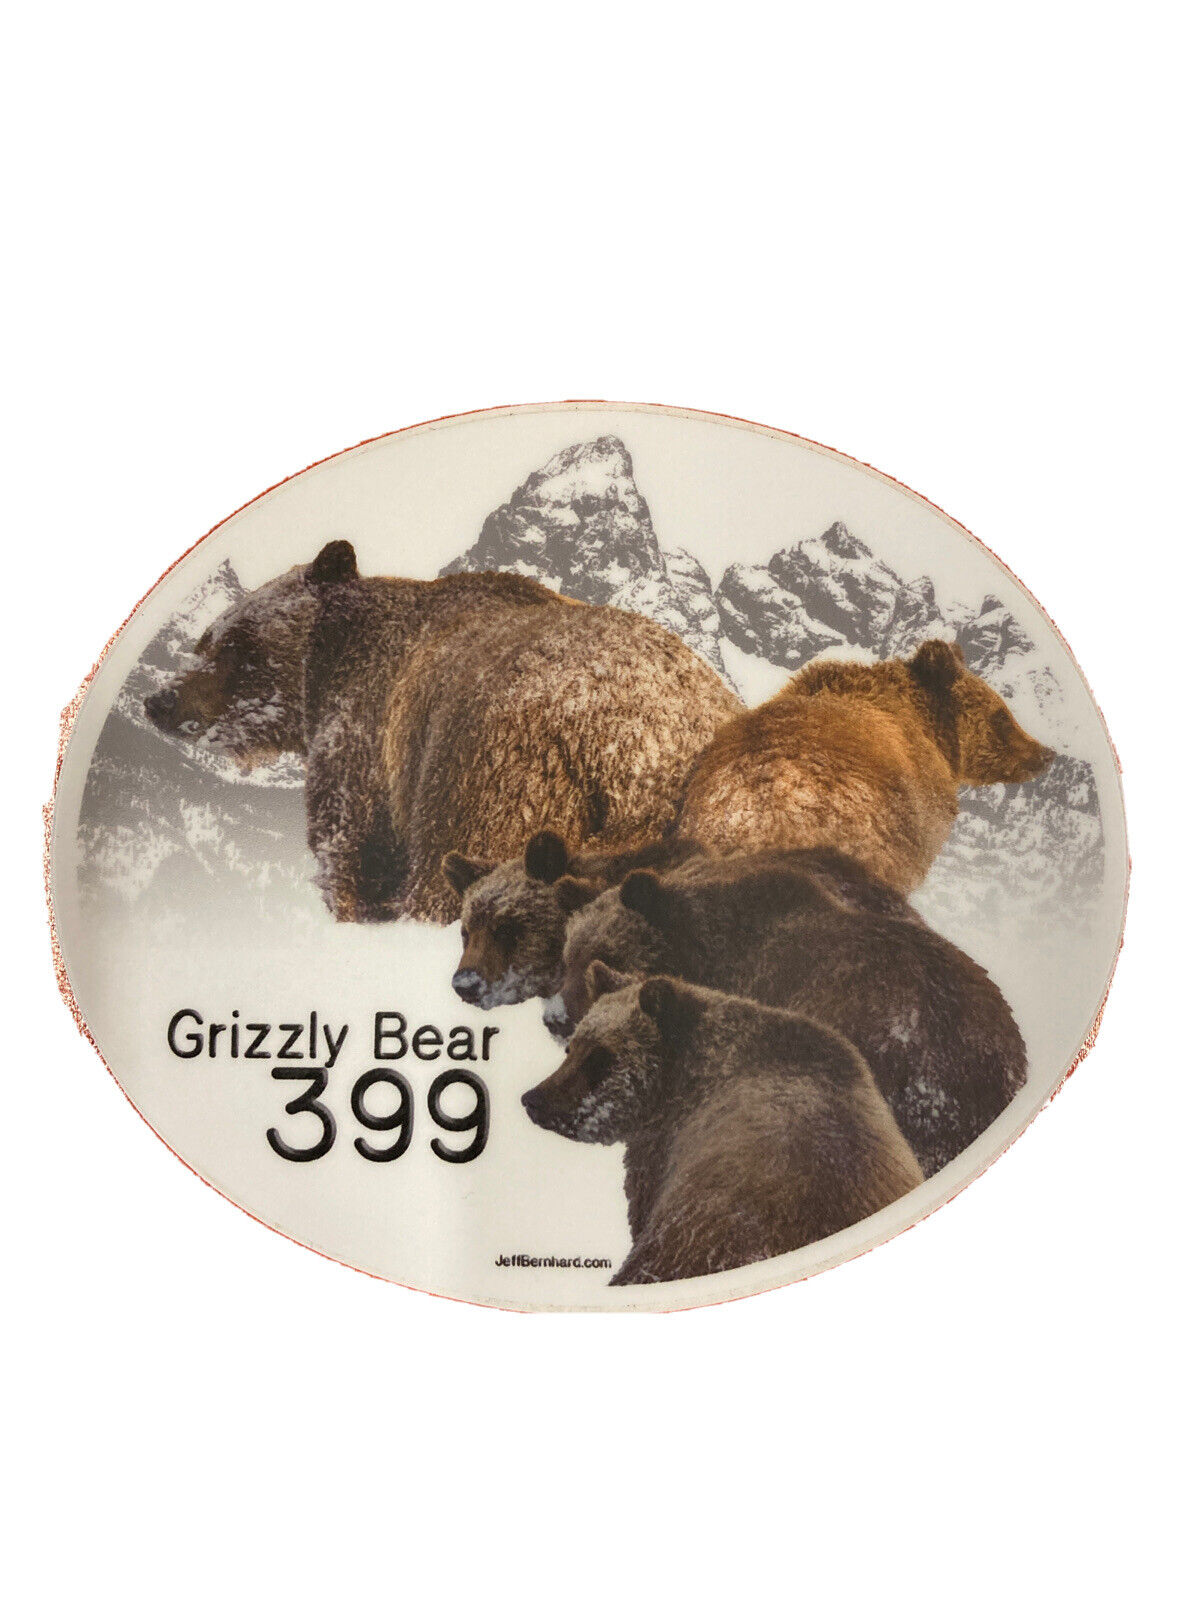 Grizzly Bear 399 with 4 Cubs in Grand Teton National Park Magnet